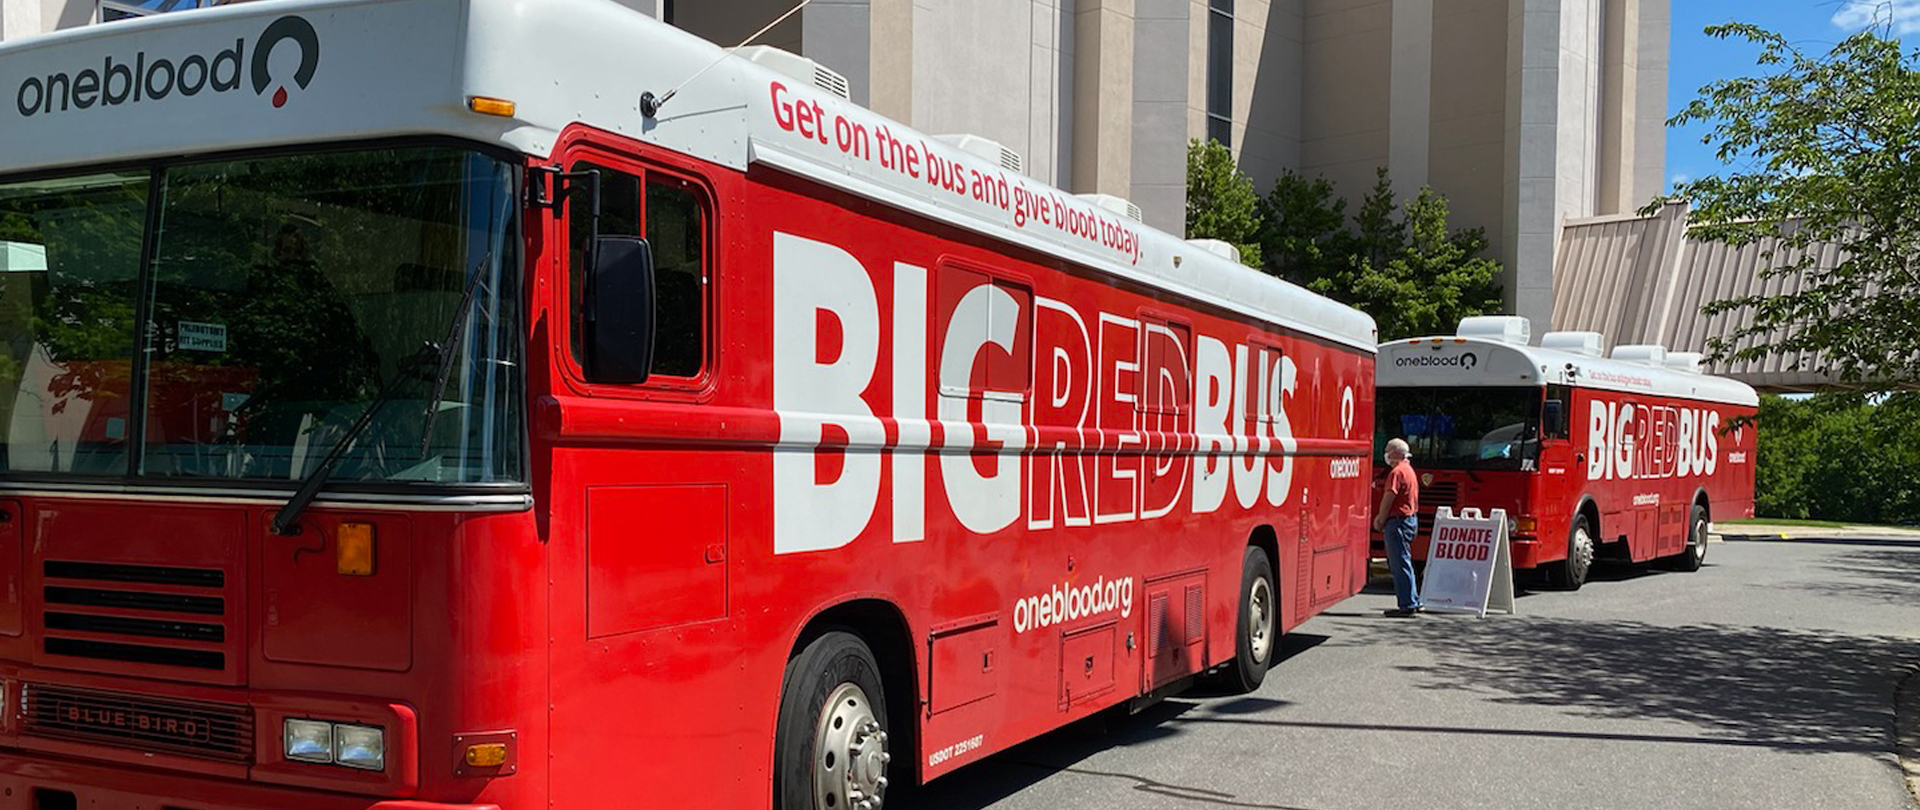 Blood Drive
Friday, August 19
9:00 AM–2:00 PM
Make an appointment now
